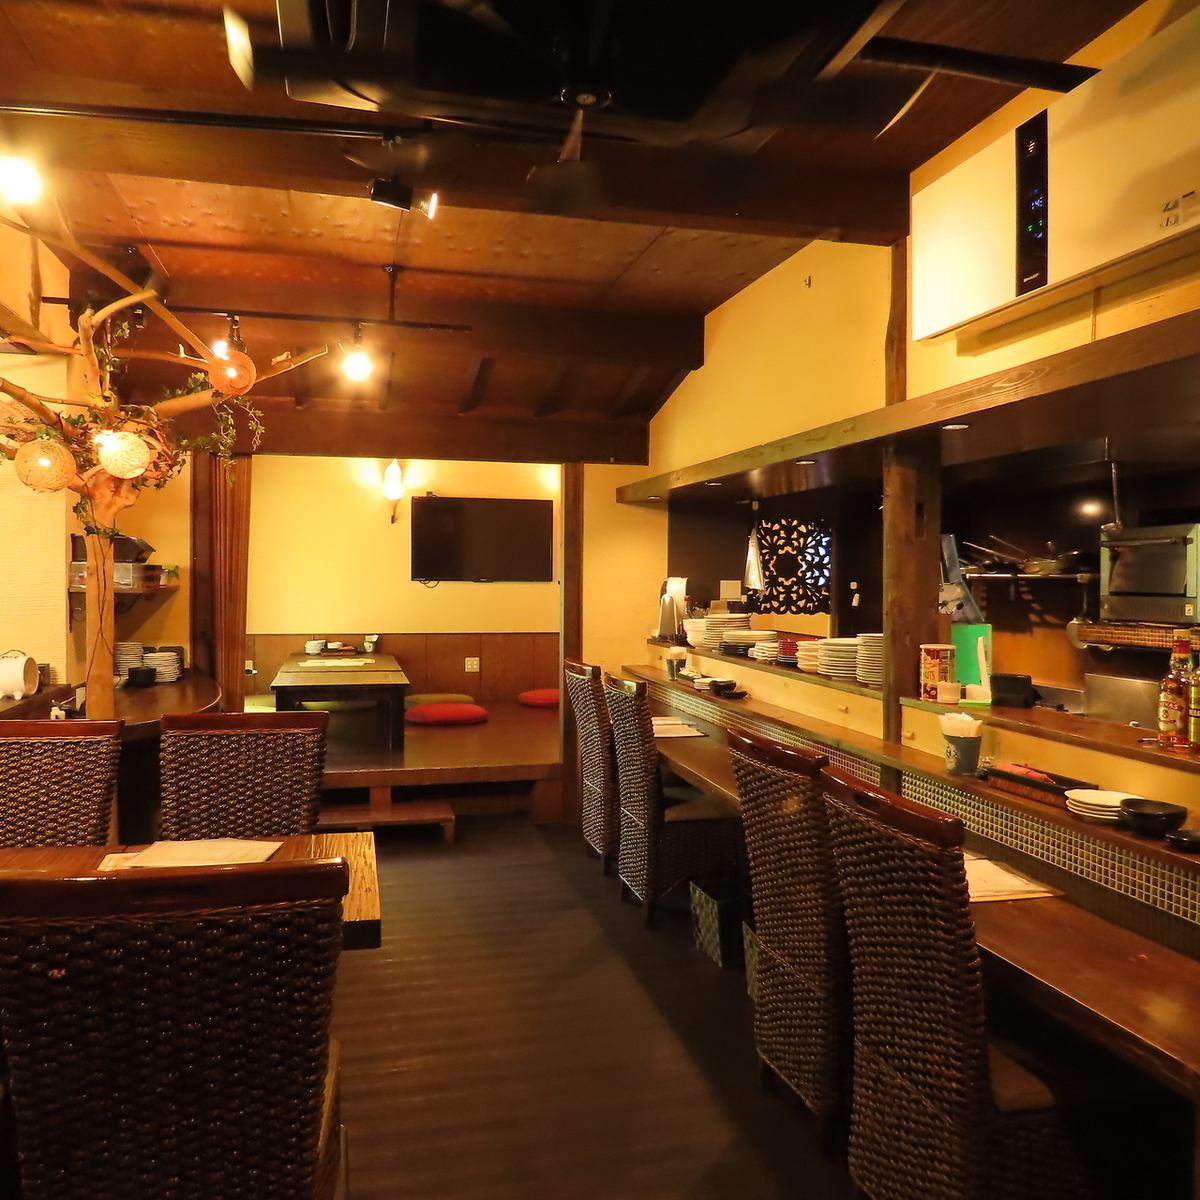 A Japanese-style adult space away from the hustle and bustle...We have delicious food and drinks.